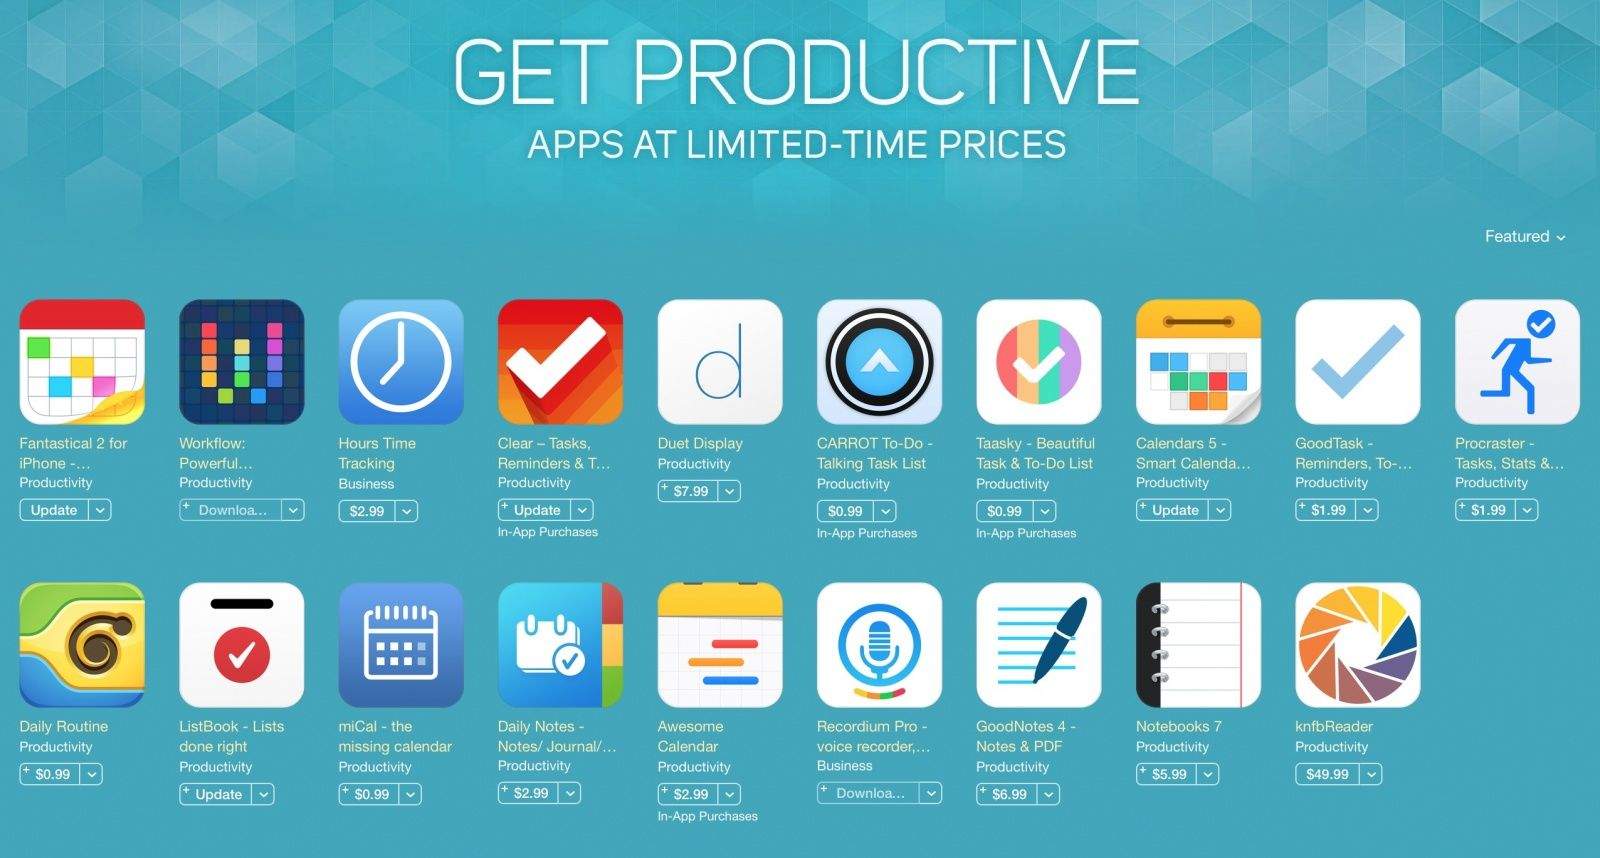 The App Store is having a blowout sale on productivity apps